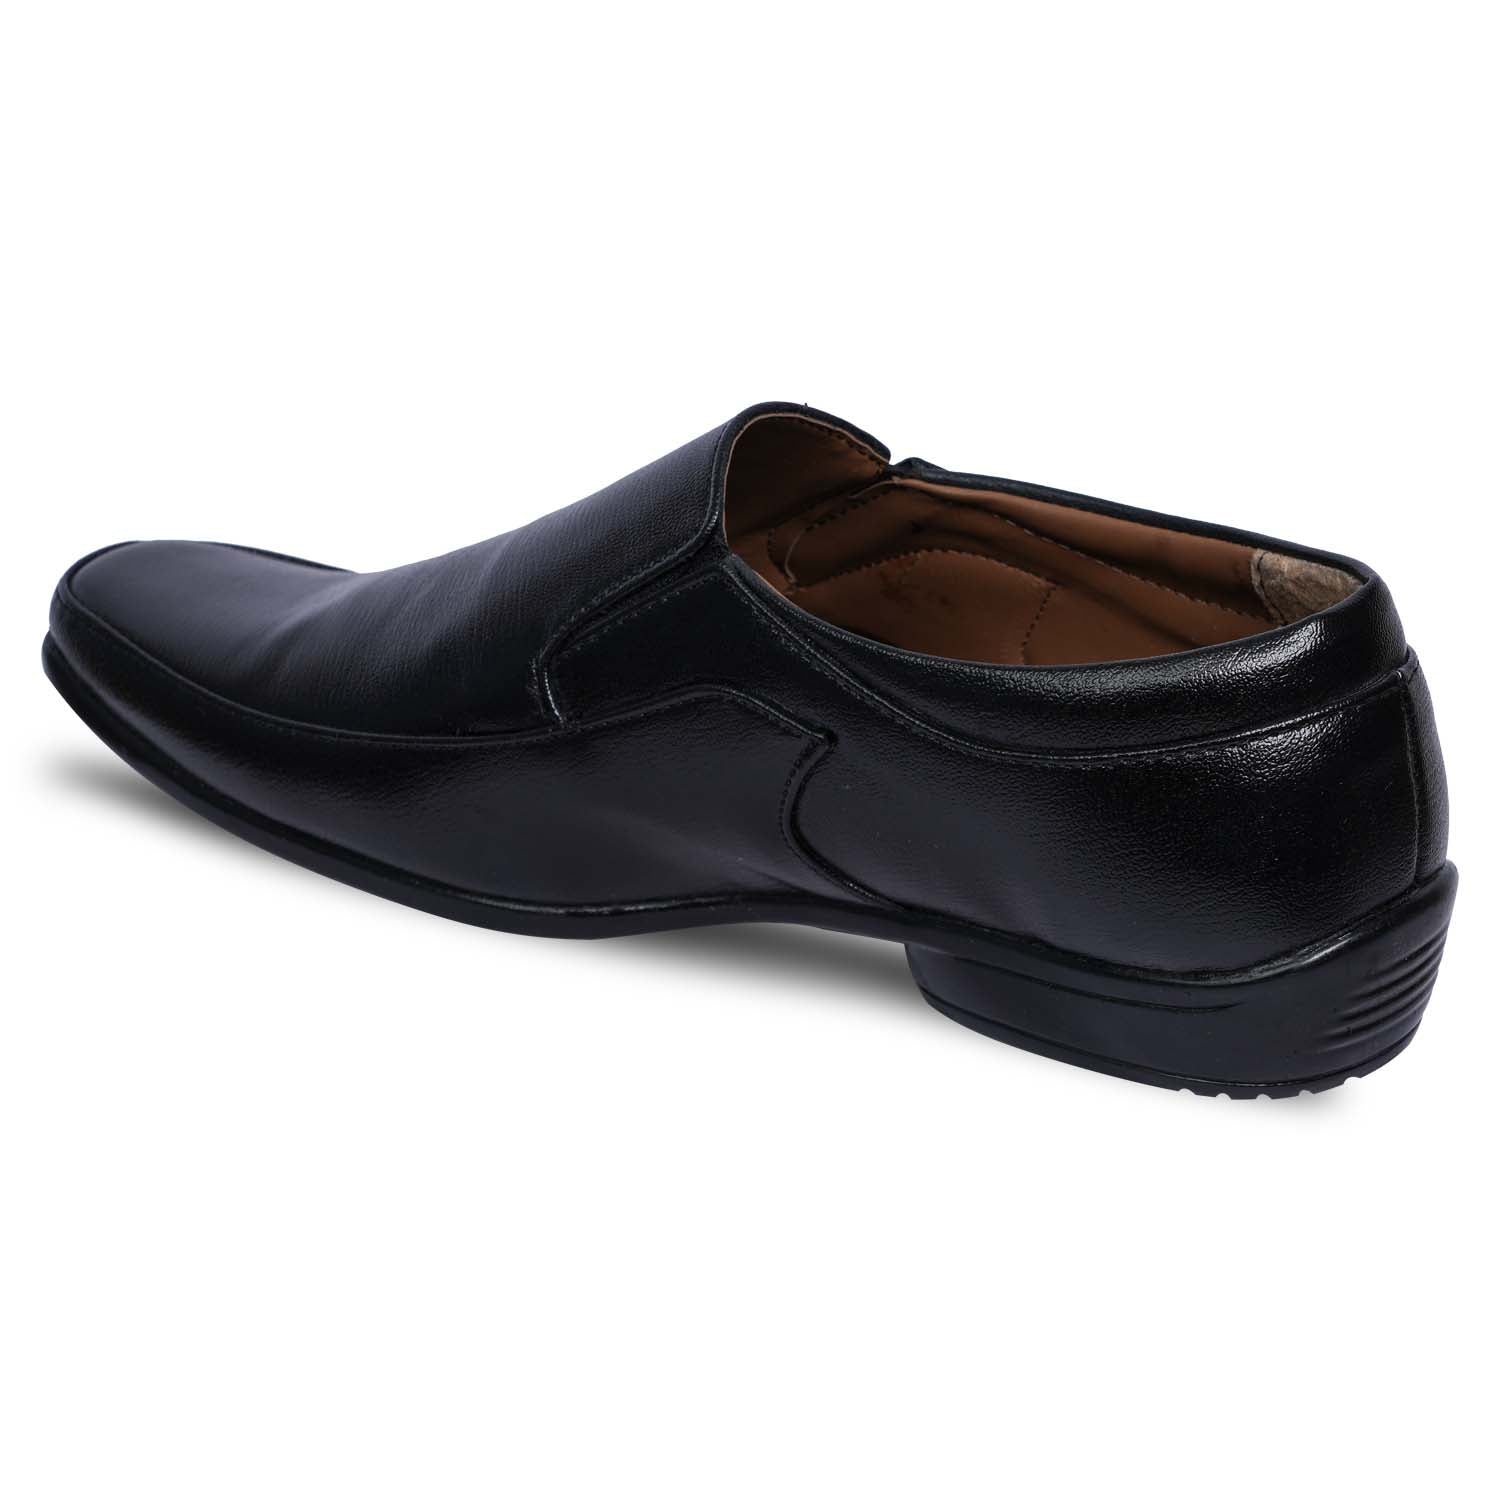 Paragon R2002G Men Formal Shoes | Corporate Office Shoes | Smart &amp; Sleek Design | Comfortable Sole with Cushioning | Daily &amp; Occasion Wear